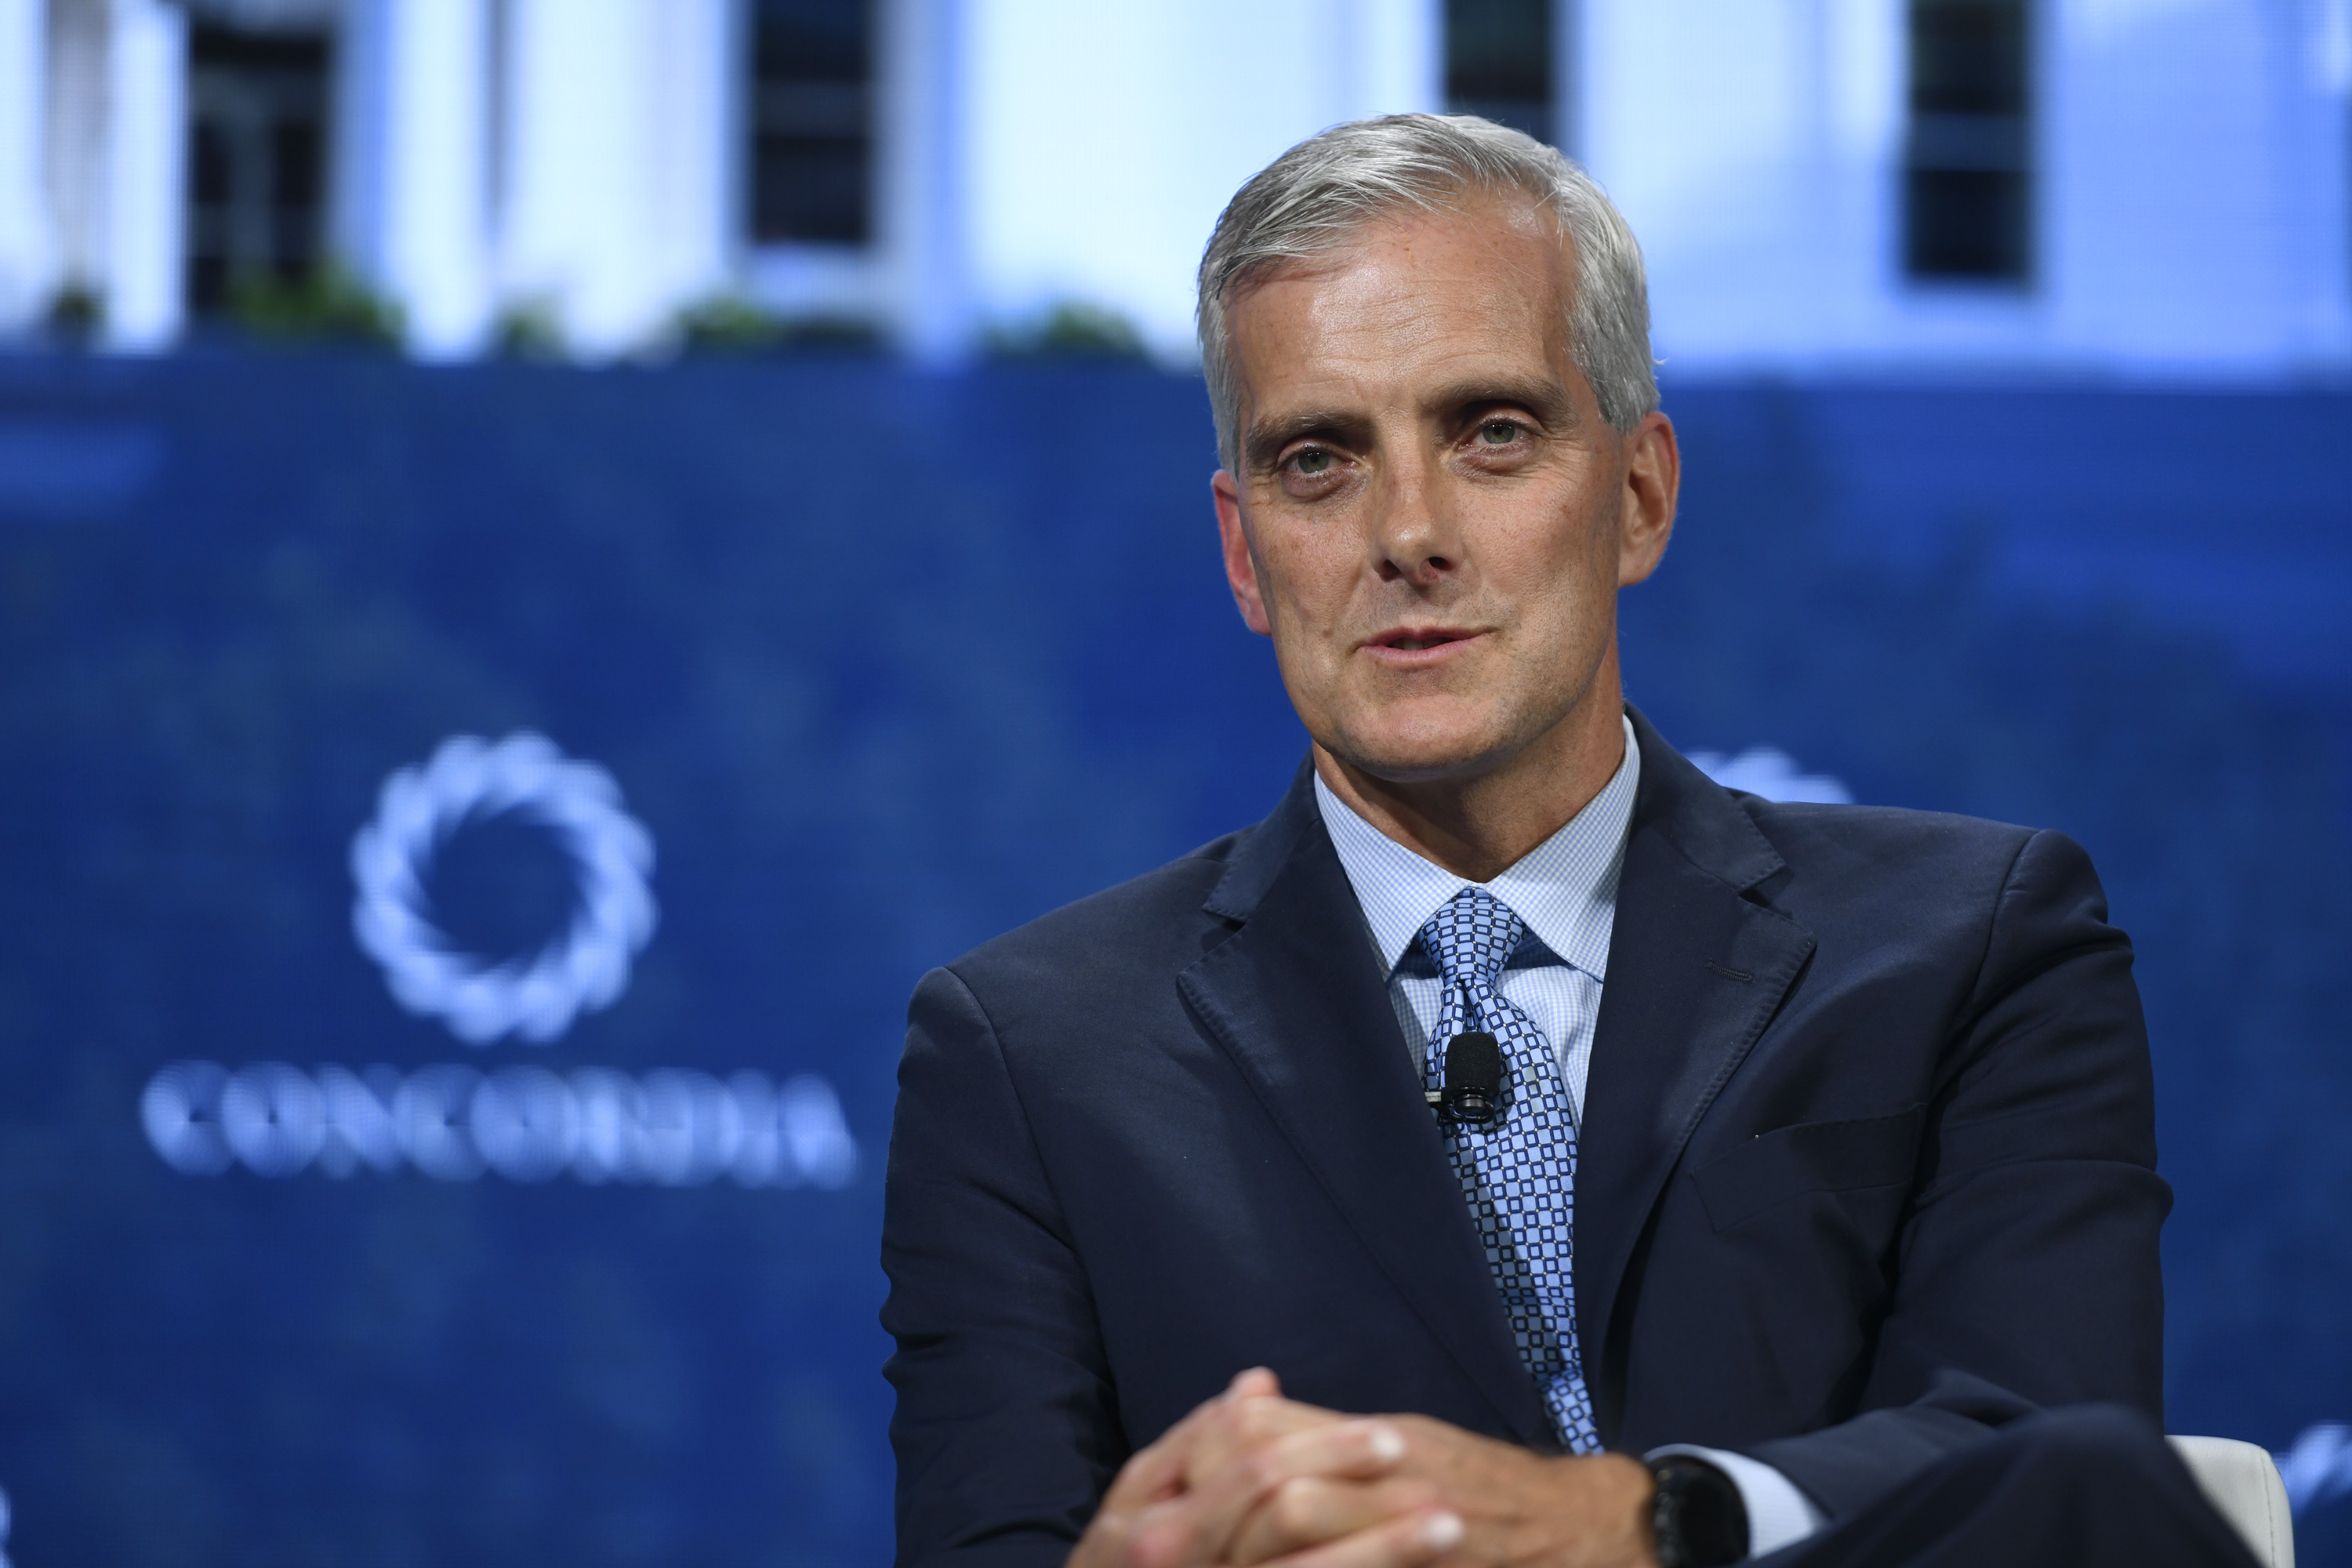 Denis McDonough speaks during the 2018 Concordia Annual Summit in New York.